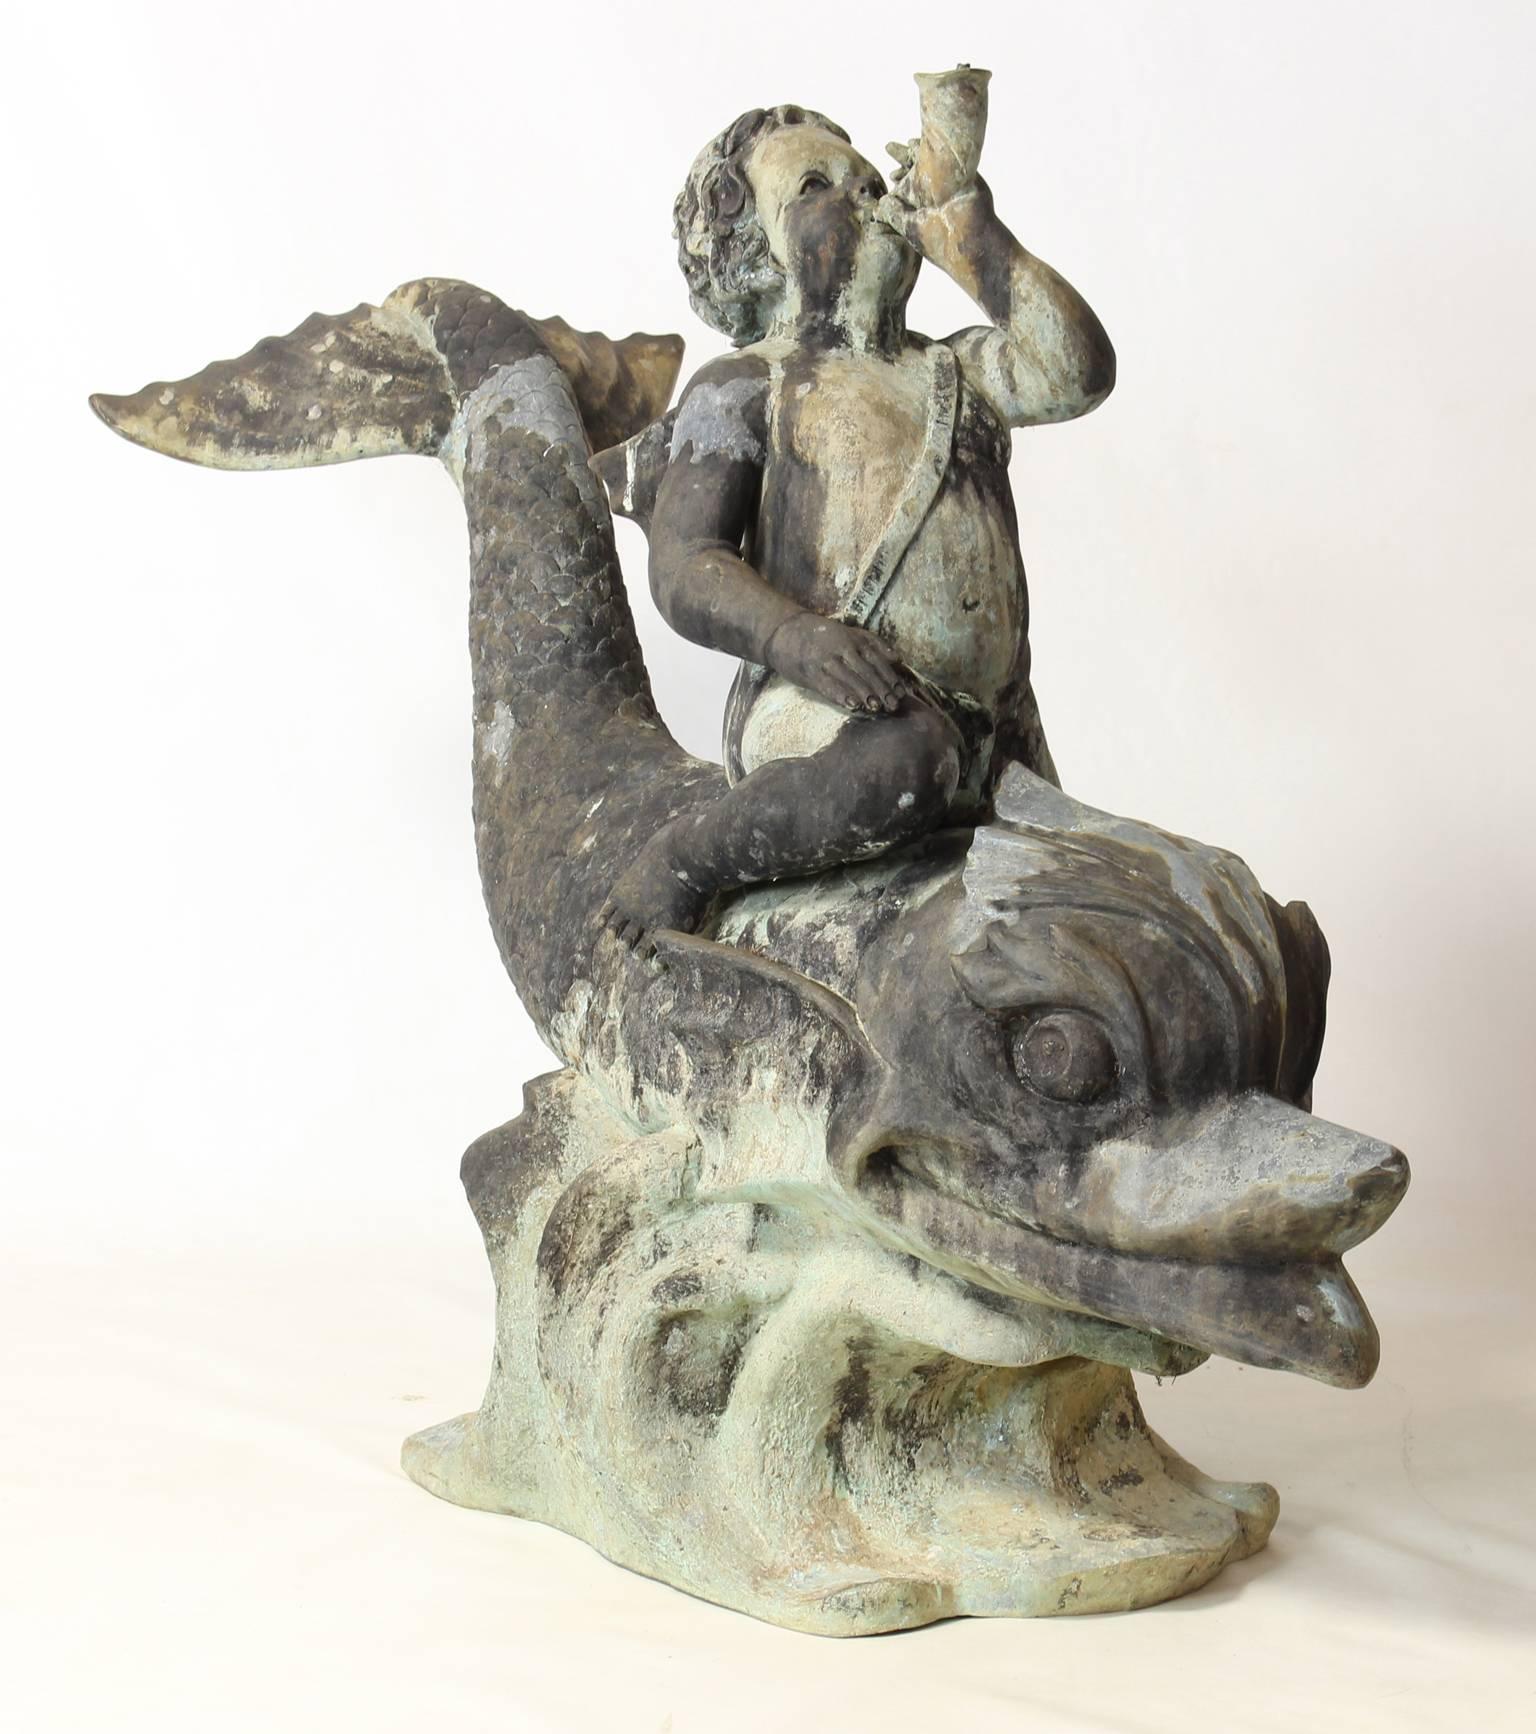 A large and whimsical late 19th century finely detailed Italian cast bronze fountain of a cherub astride a frolicking dolphin.